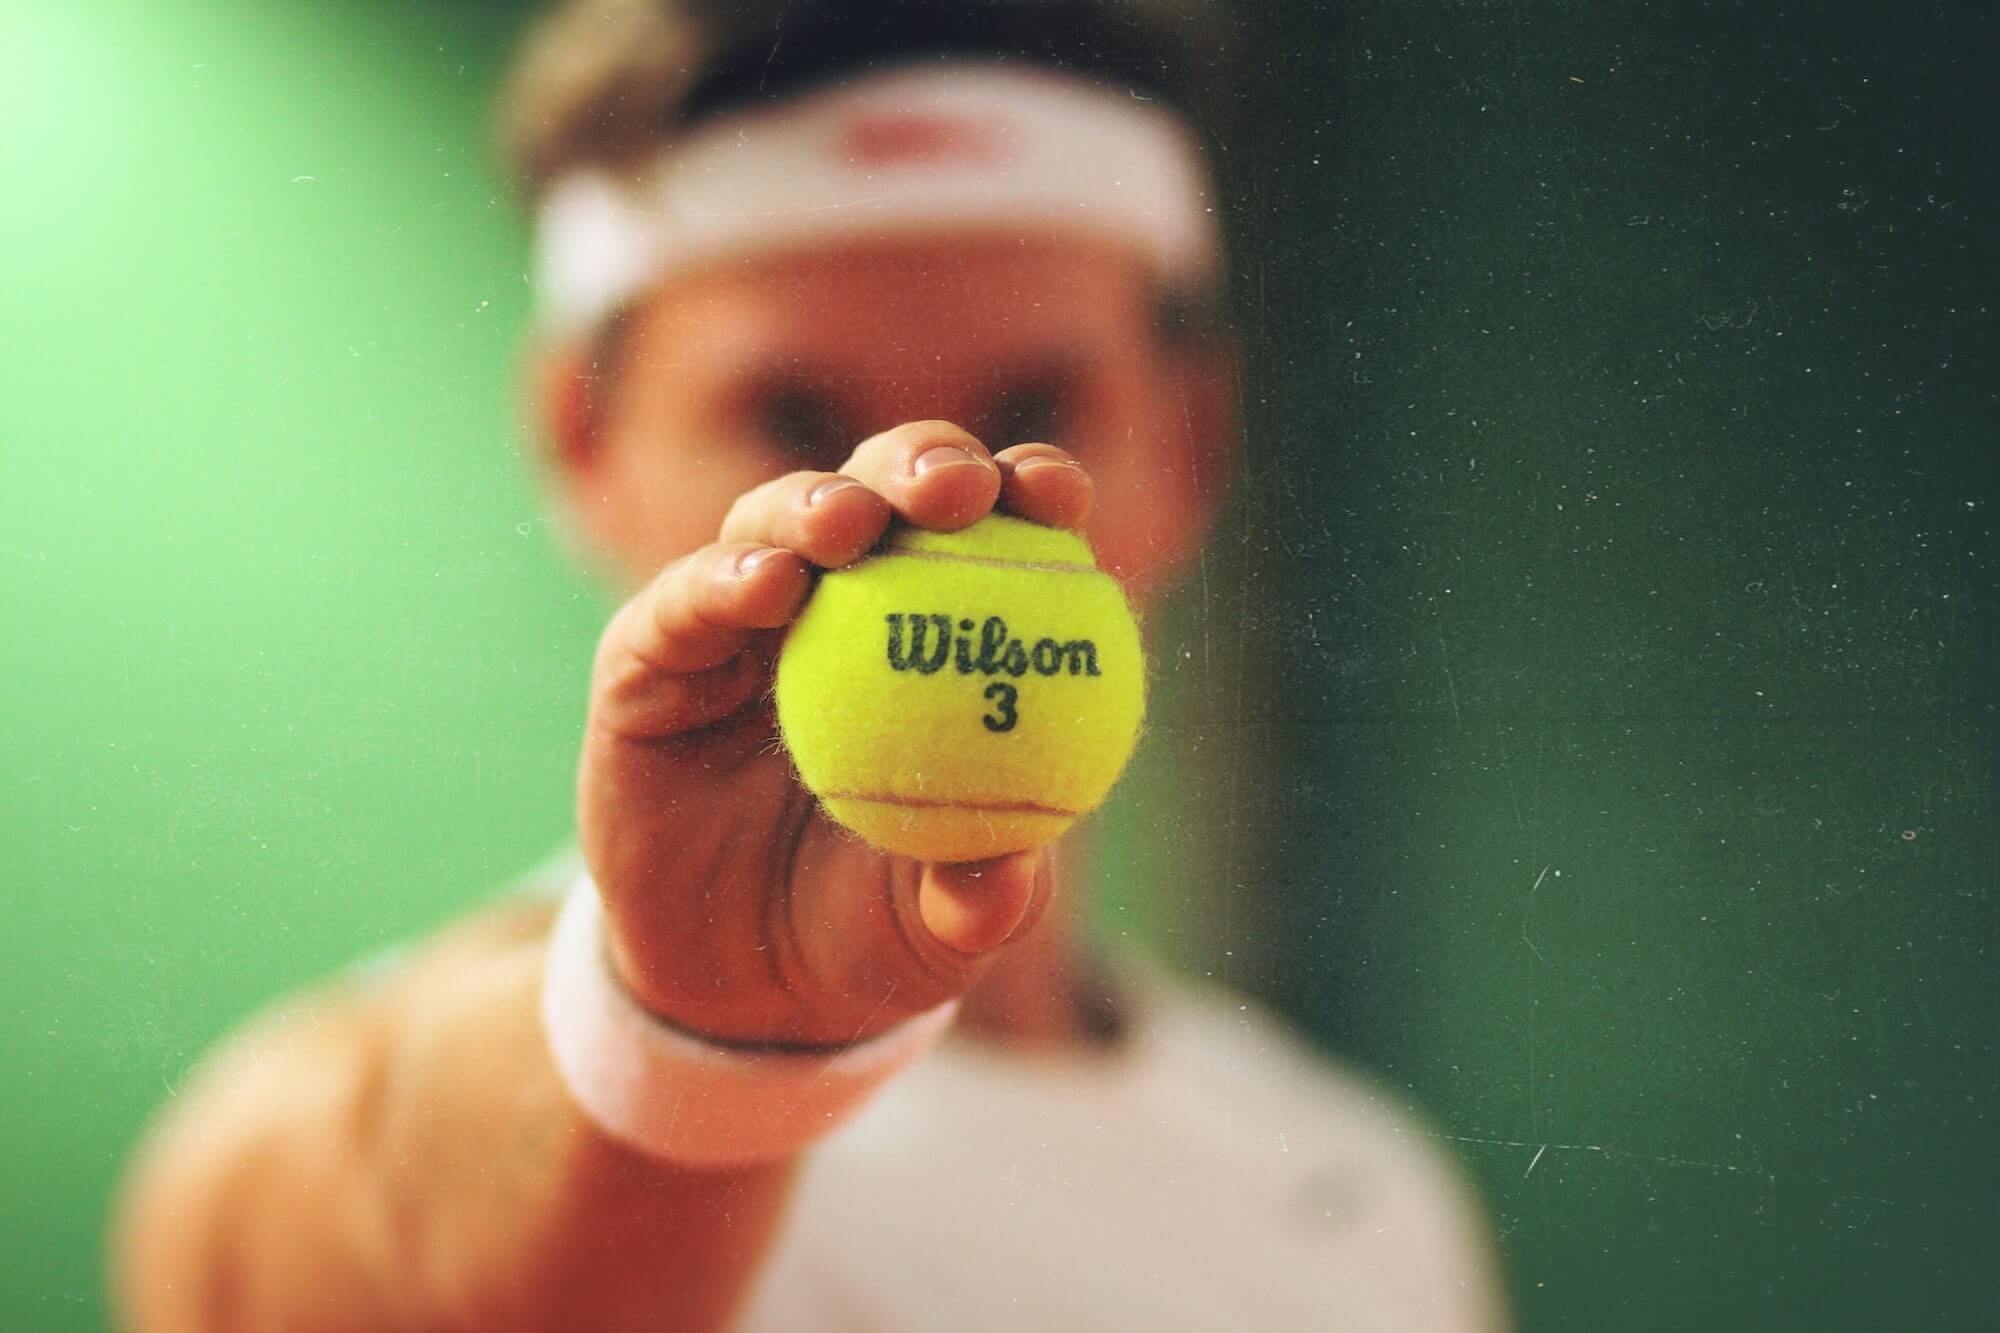 How the International Tennis Federation uses no-code technology to create young tennis stars